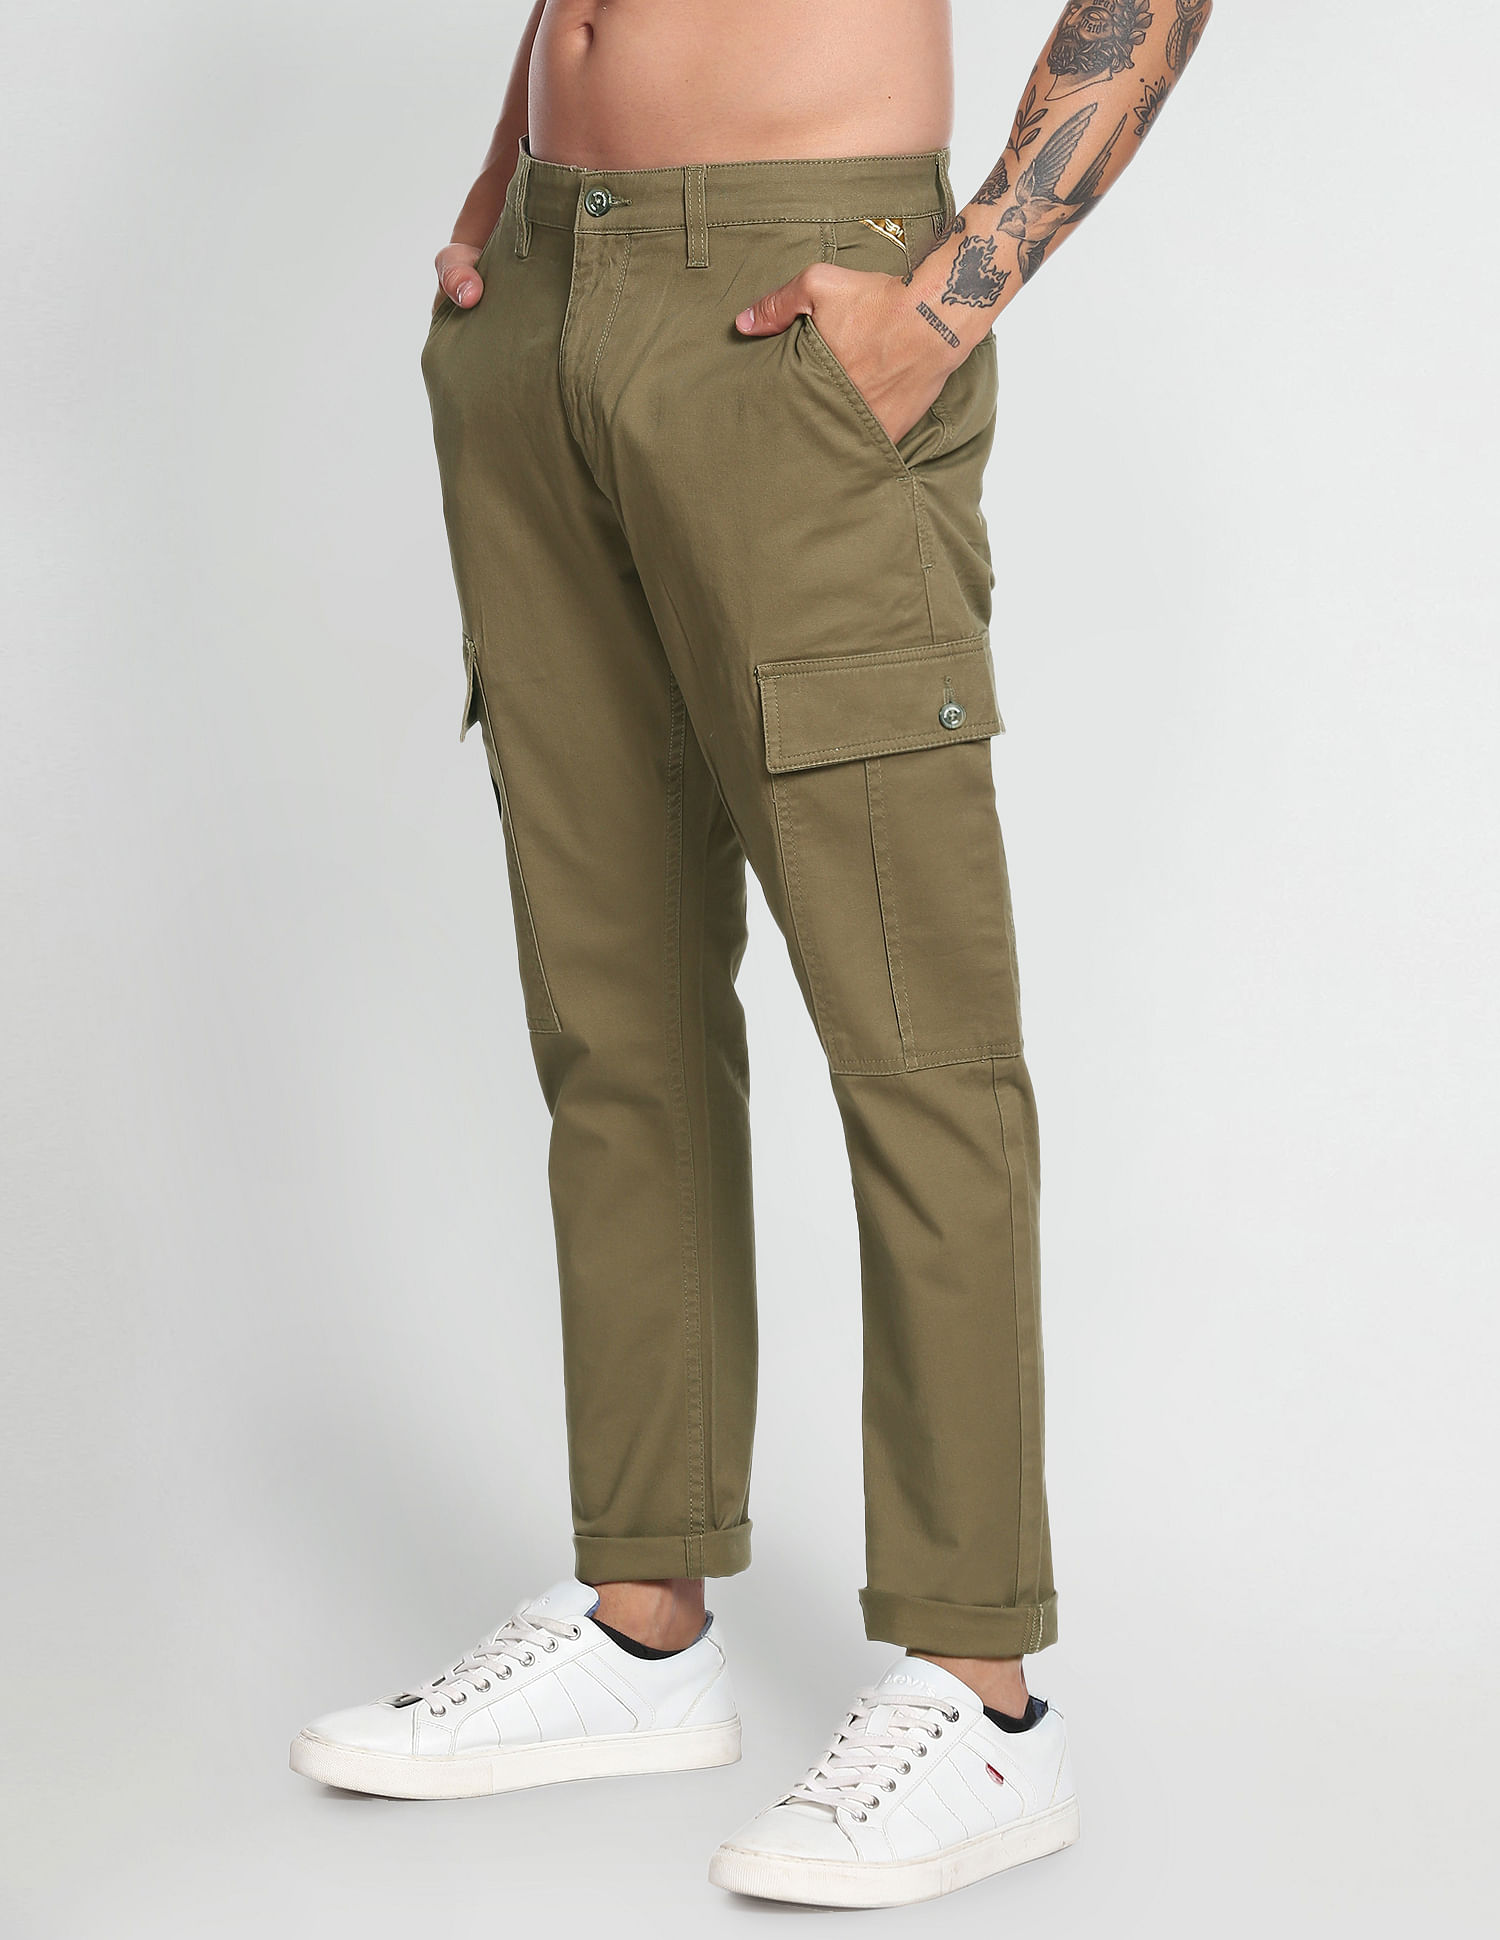 REPLAY & SONS Cargo Trousers Beige for boys | NICKIS.com